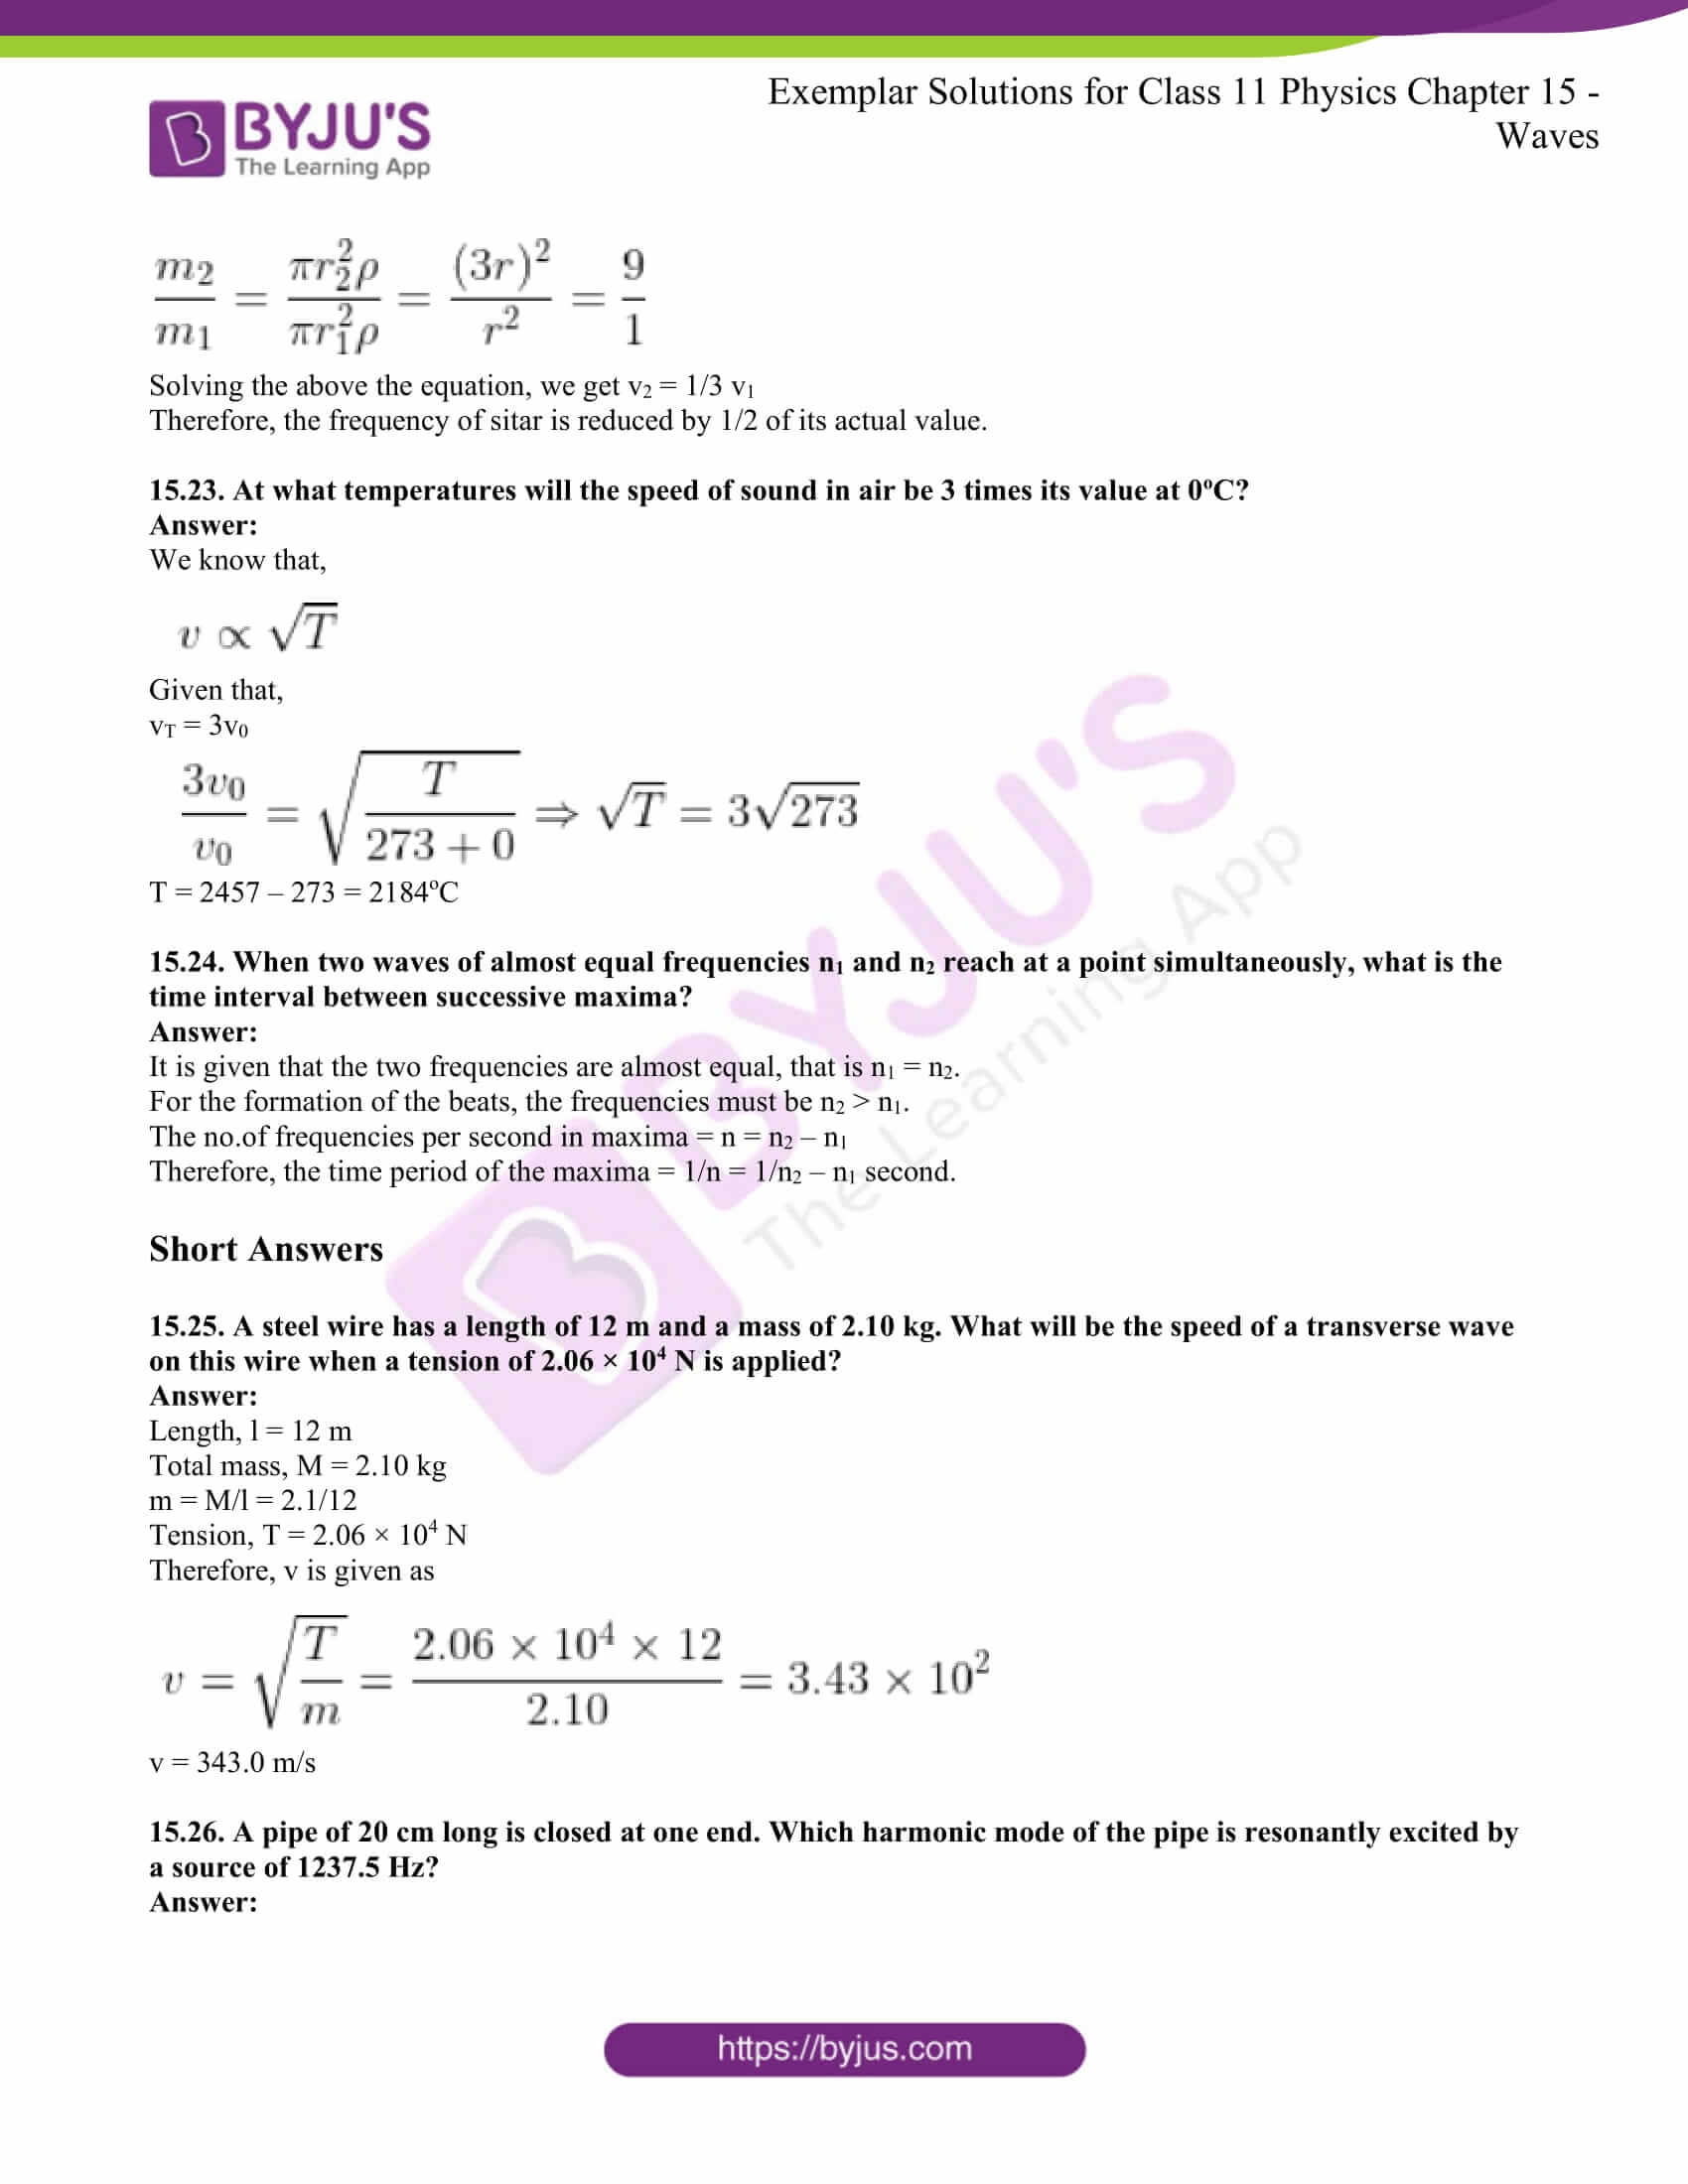 ncert-exemplar-class-11-physics-solutions-chapter-15-check-out-the-pdf-here-math-worksheet-answers